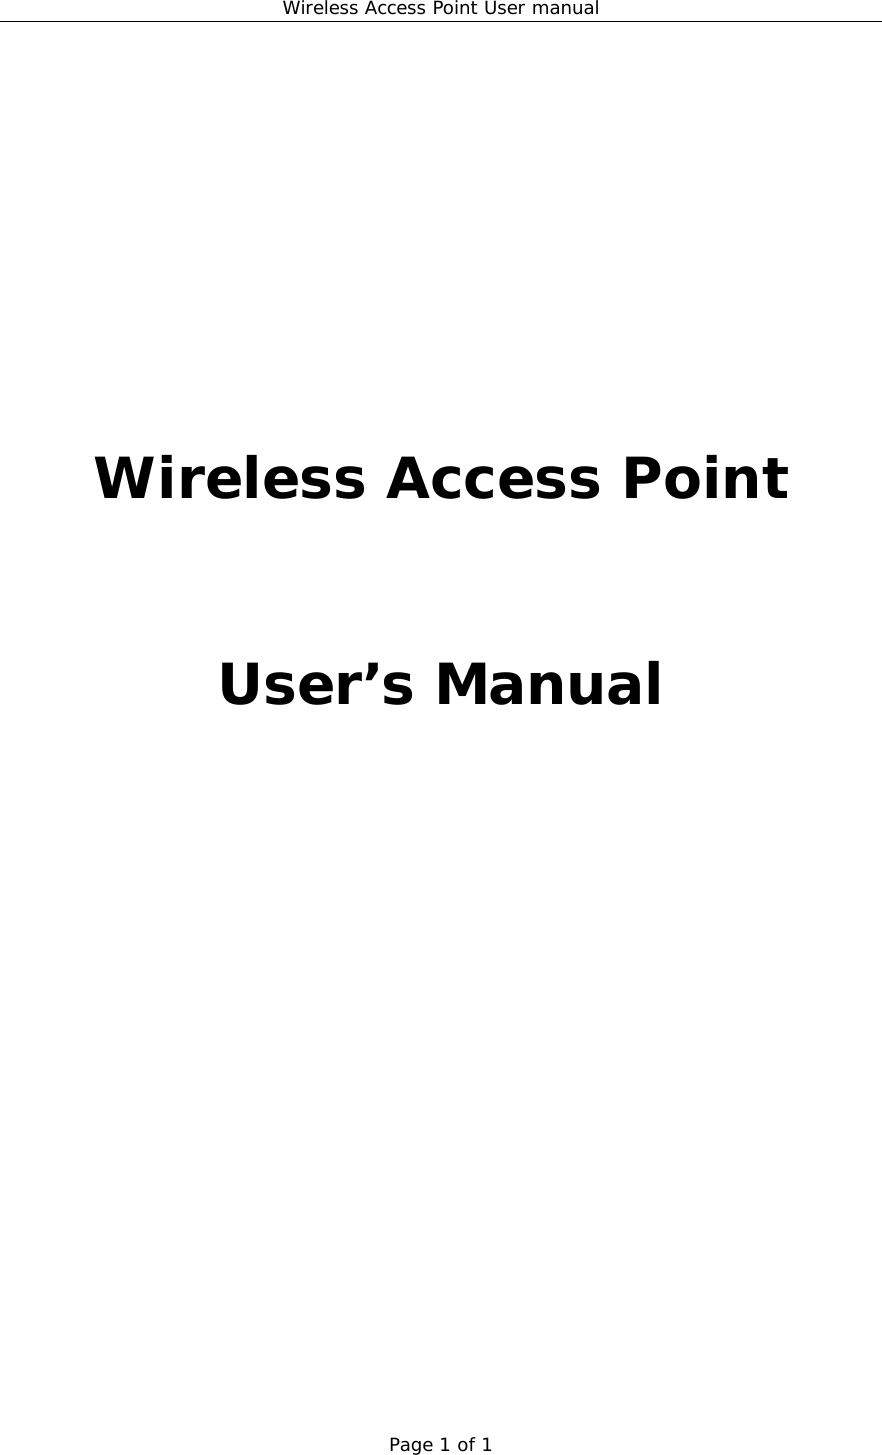 Wireless Access Point User manual Page 1 of 1       Wireless Access Point   User’s Manual                 